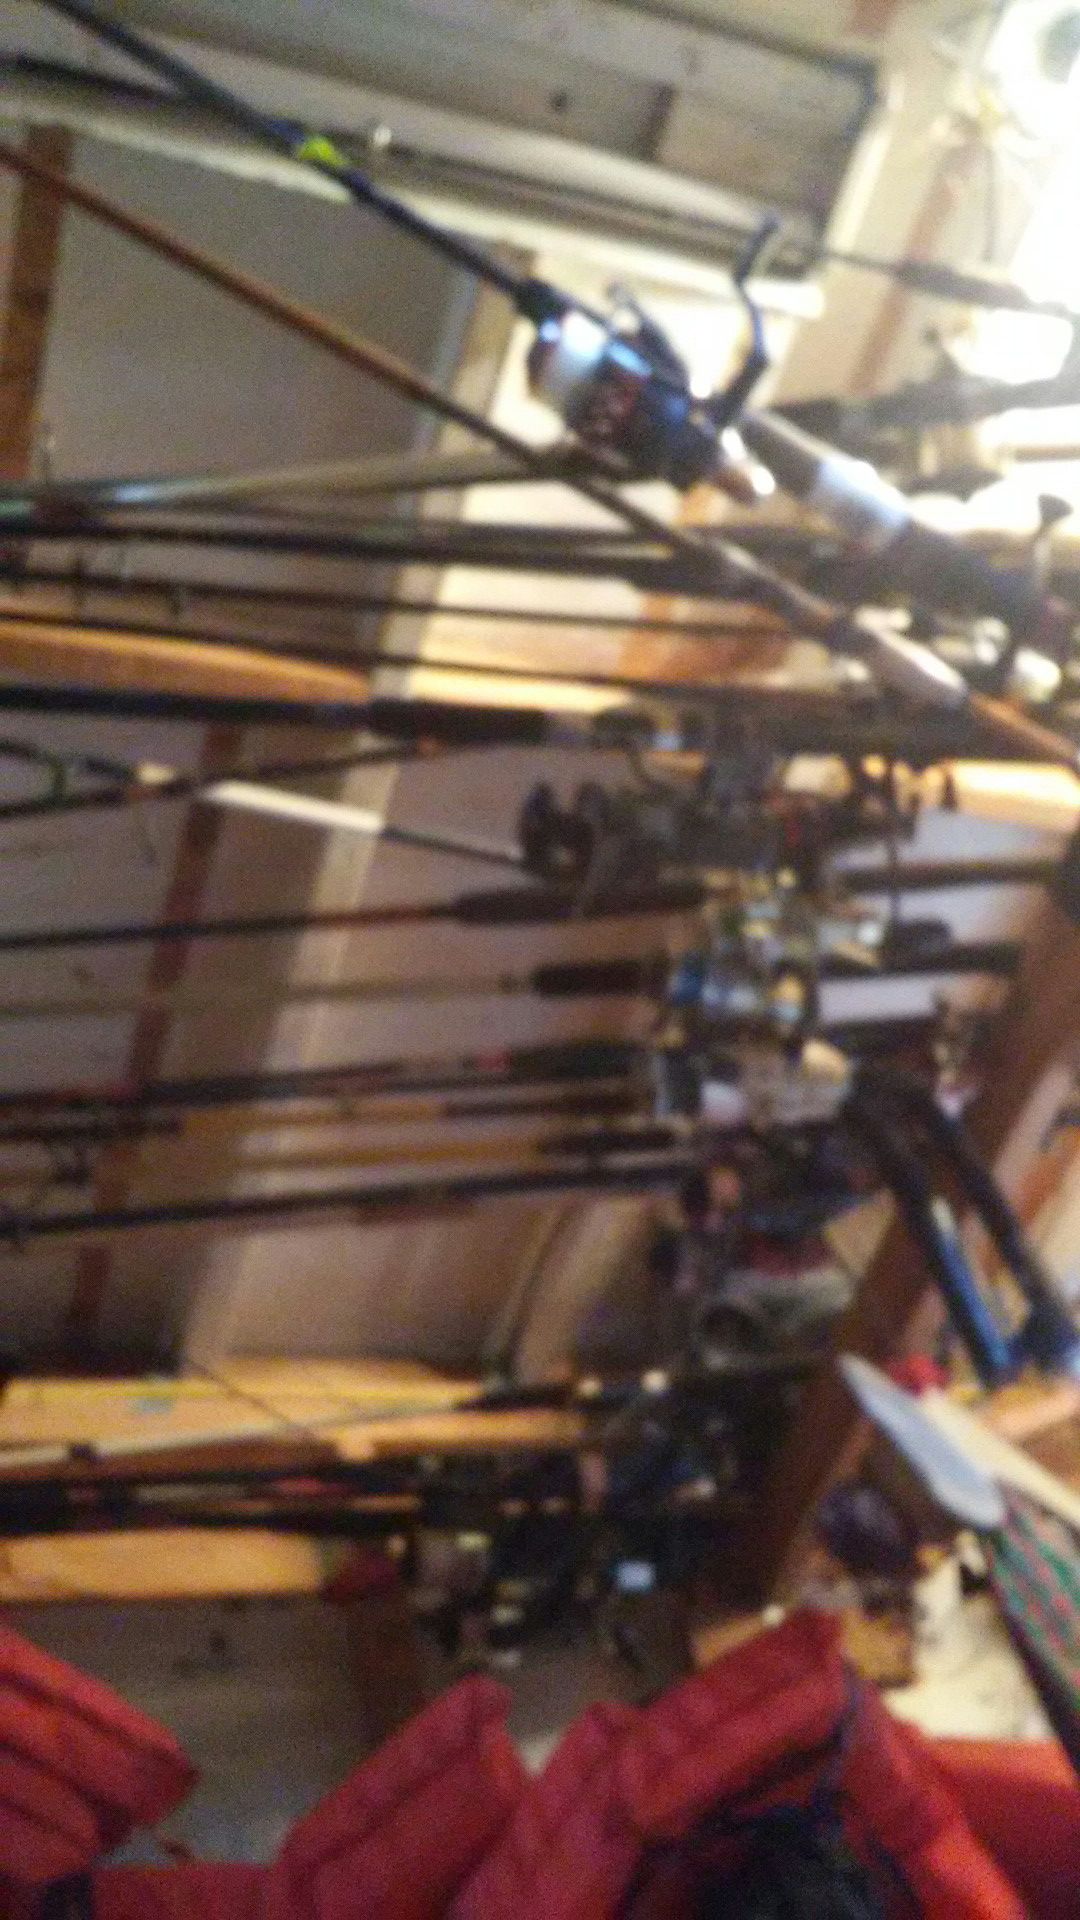 All kind of brand fishing poles some collectors